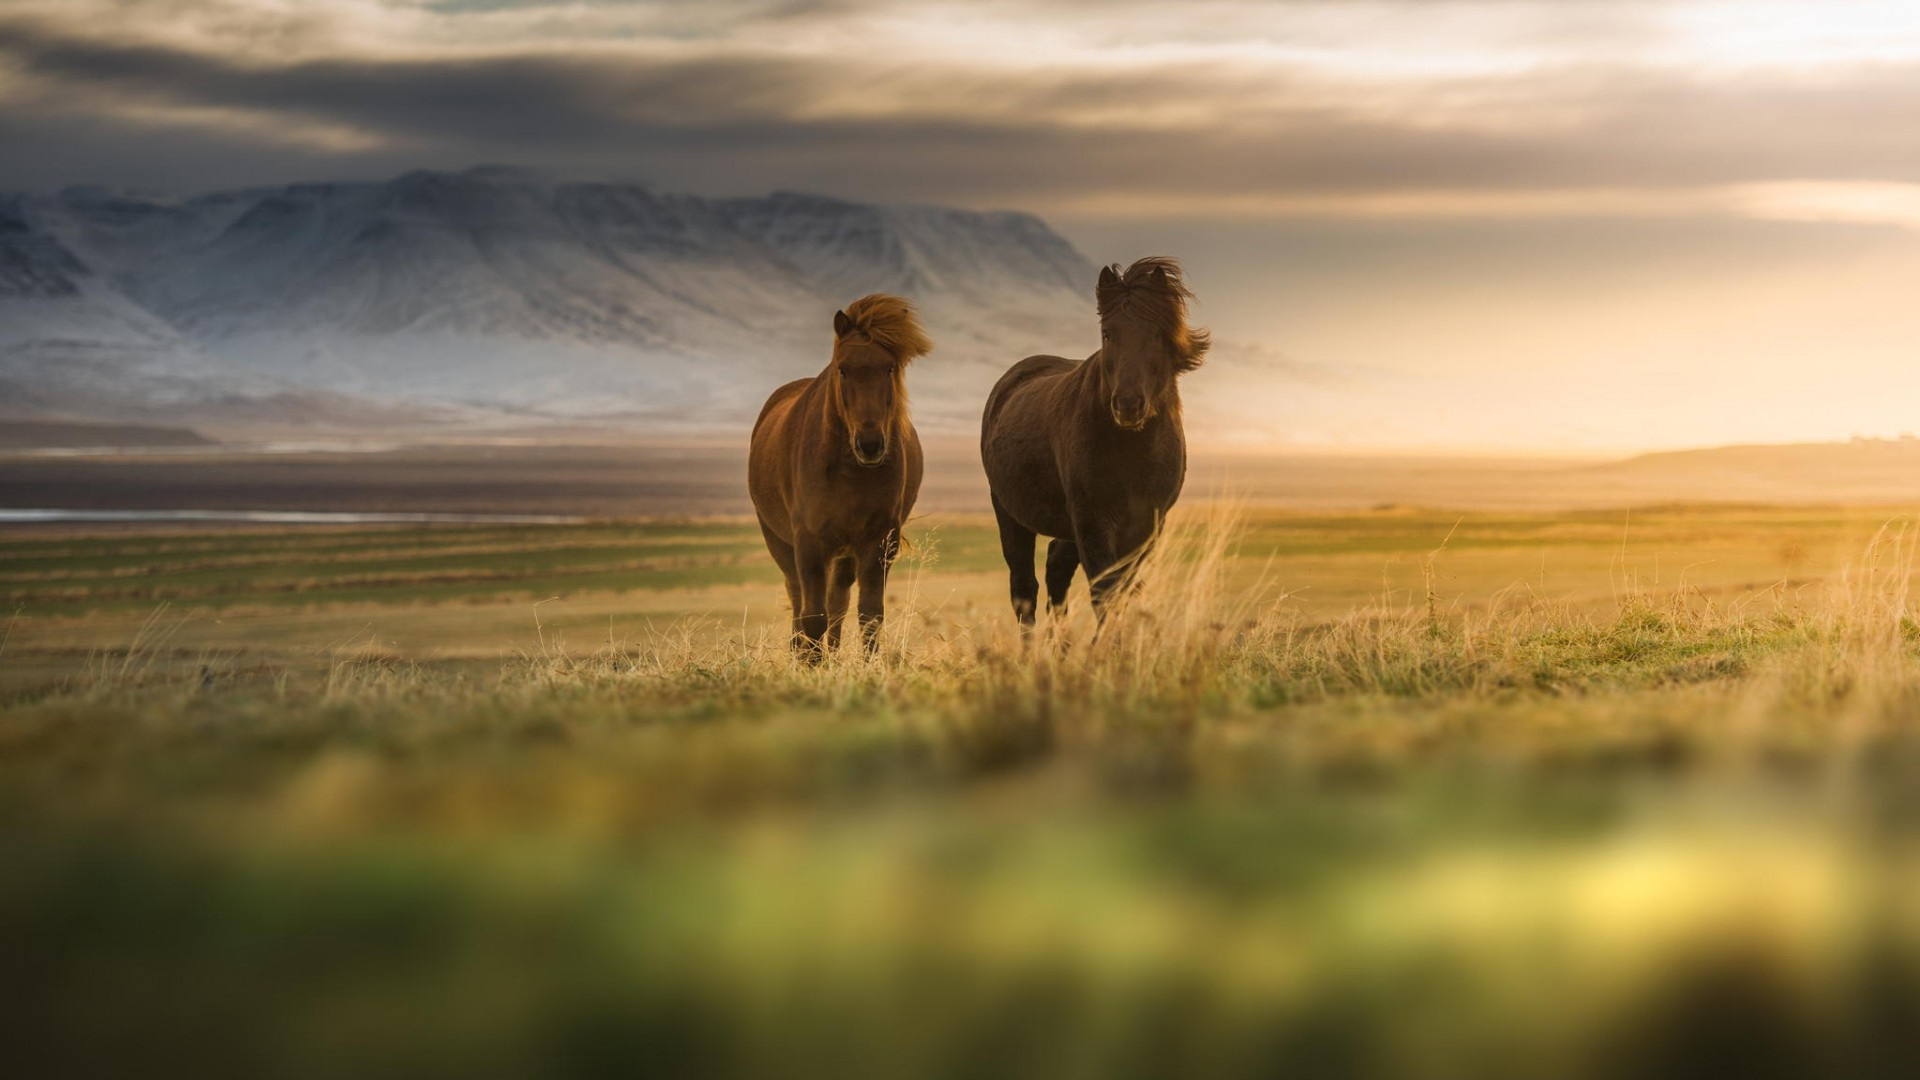 Horse HD Wallpaper | Background Image | 1920x1080 | ID ...